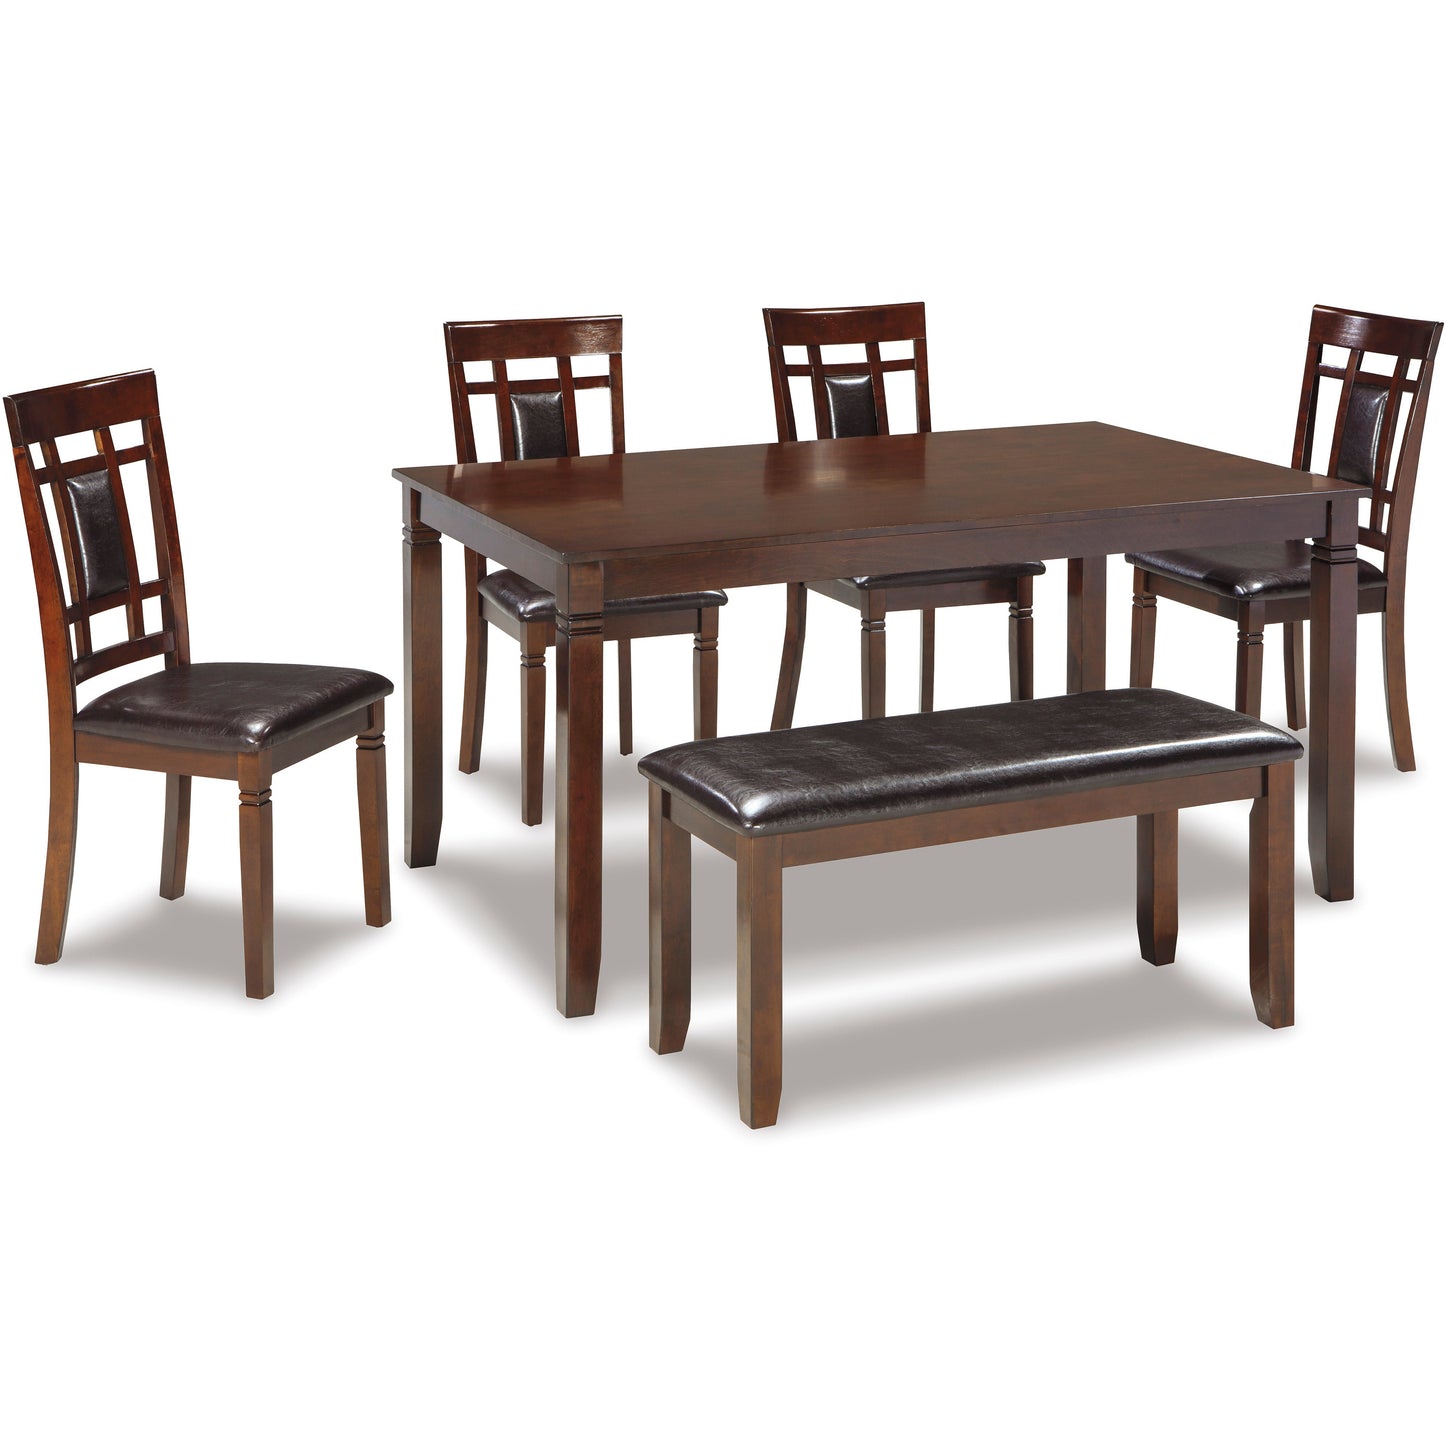 BENNOX DINING SET - TABLE, 4 CHAIRS & BENCH